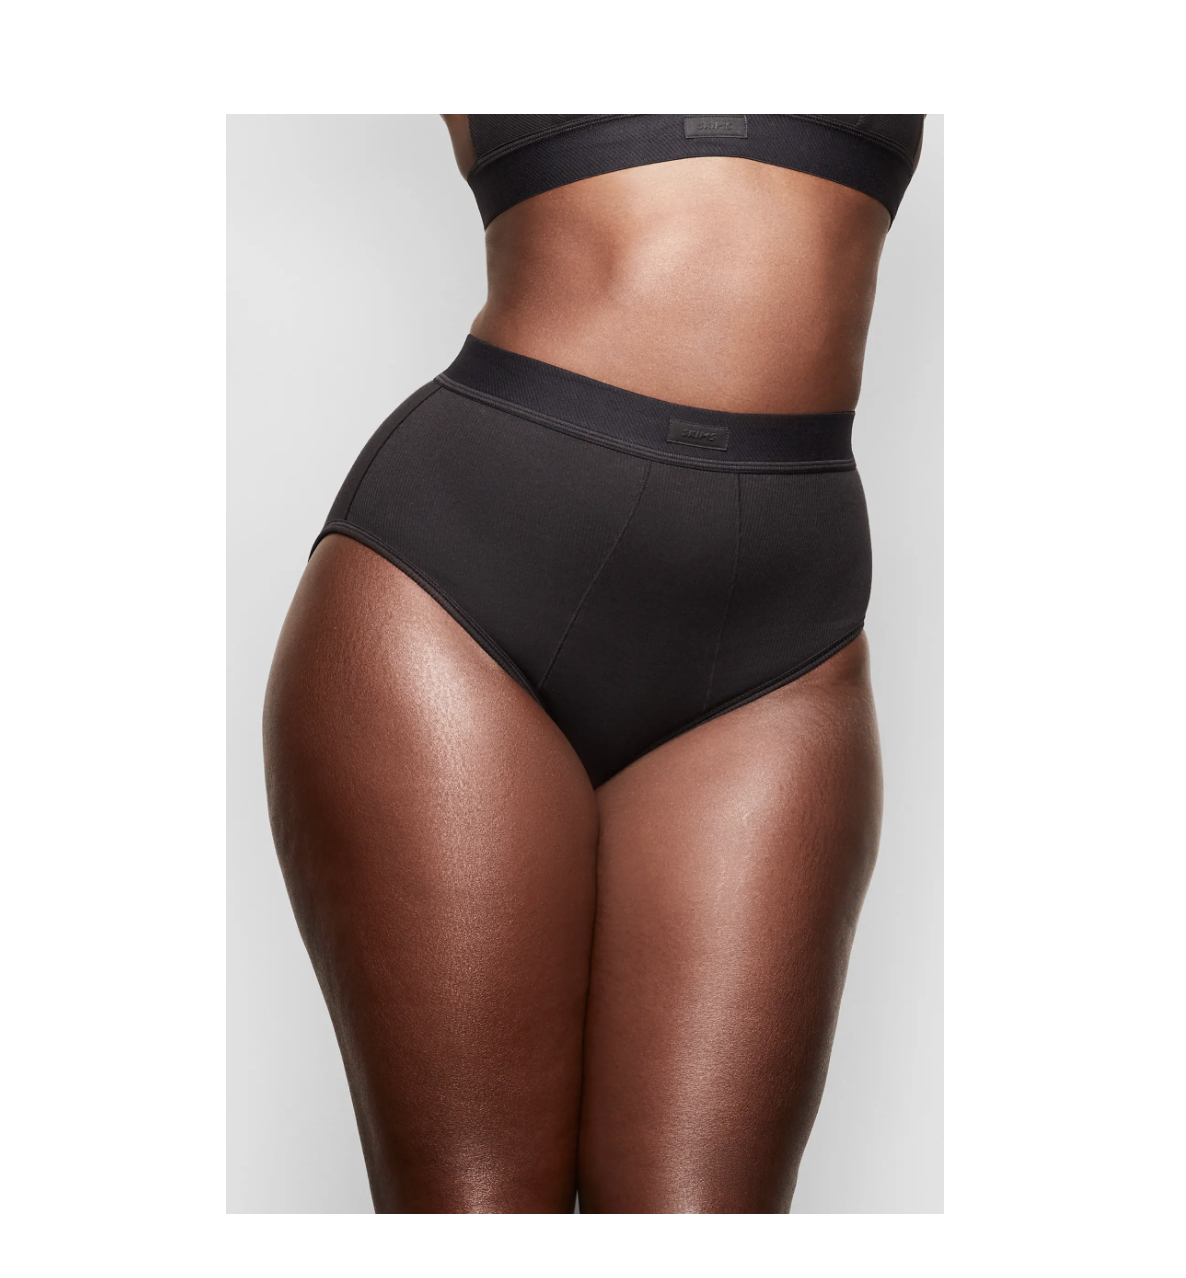 Ladies Smooth Maxi Briefs With Lycra Various Sizes 10 12 14 16 Black or White